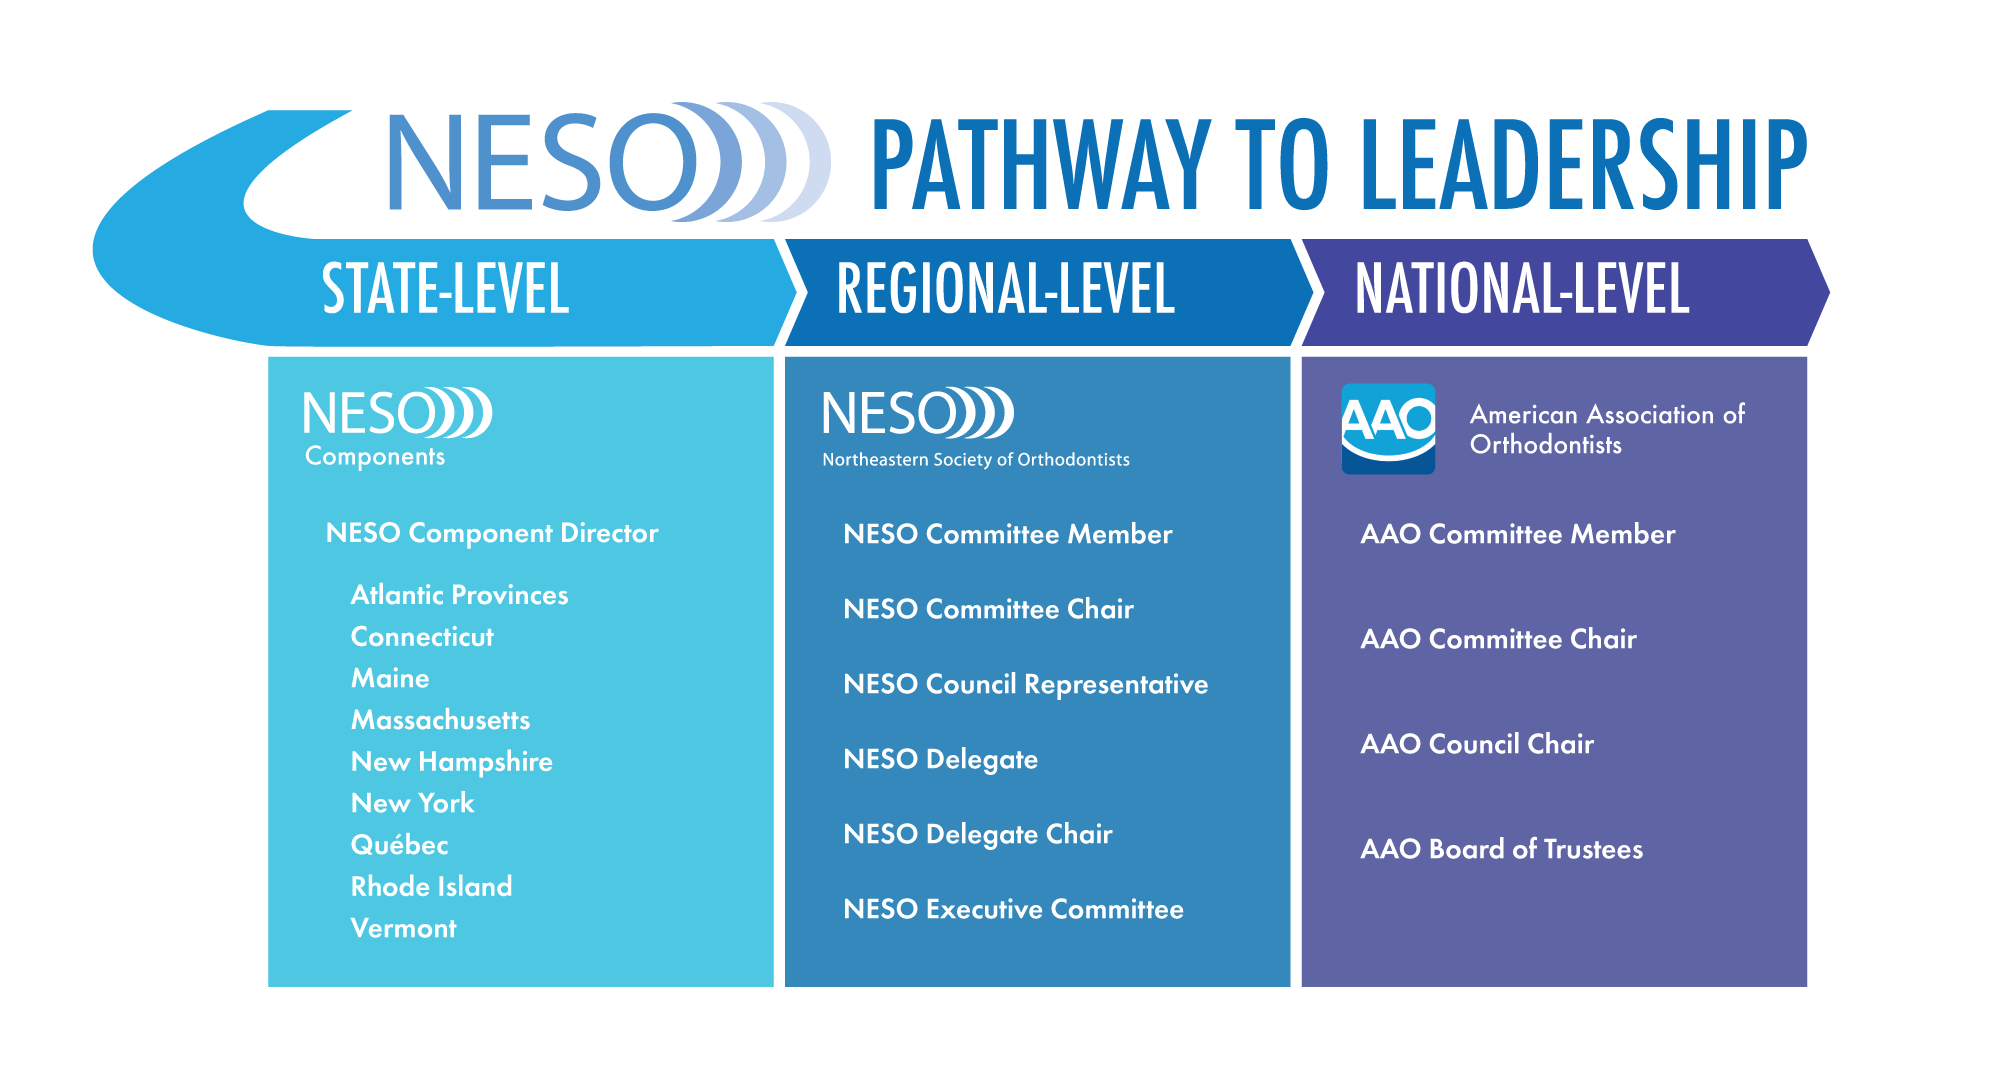 NESO and AAO Pathway to leadership infographic